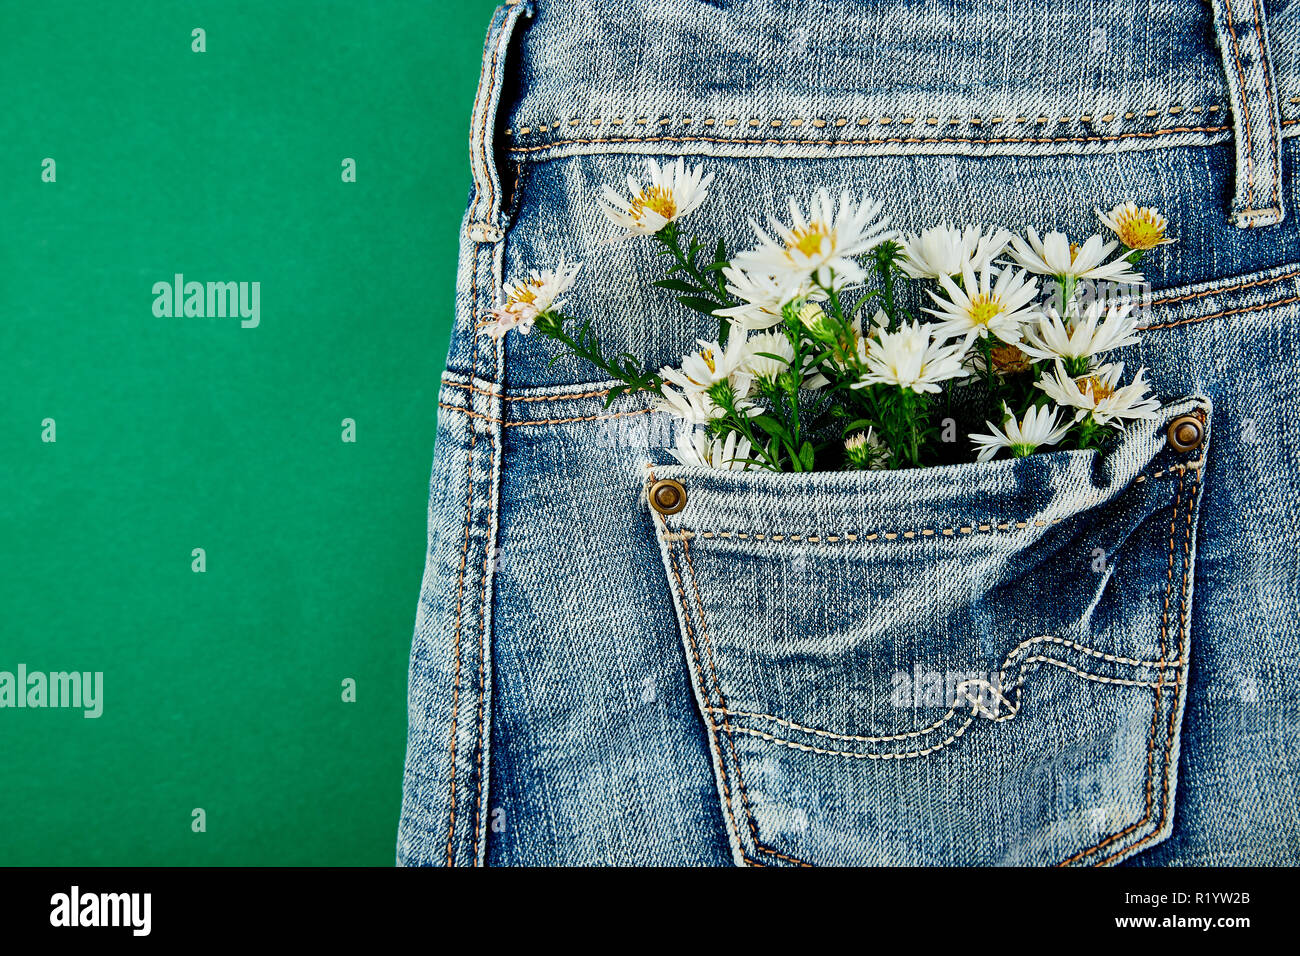 Bouquet of white flower in the pocket of a jeans on green background ...